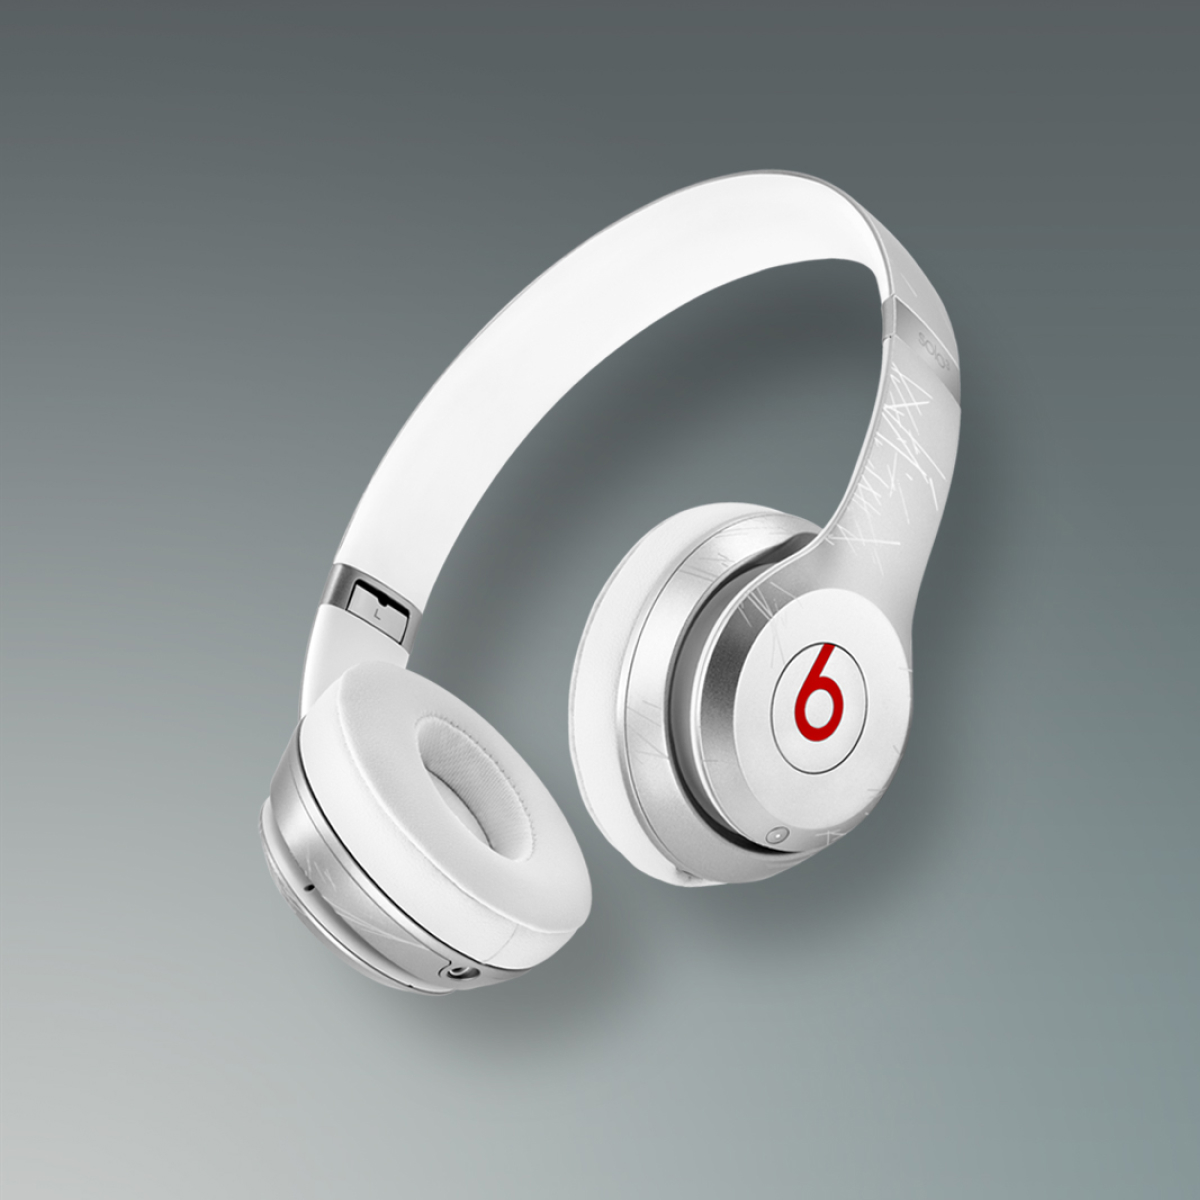 Beats by Dre (@beatsbydre) • Instagram photos and videos